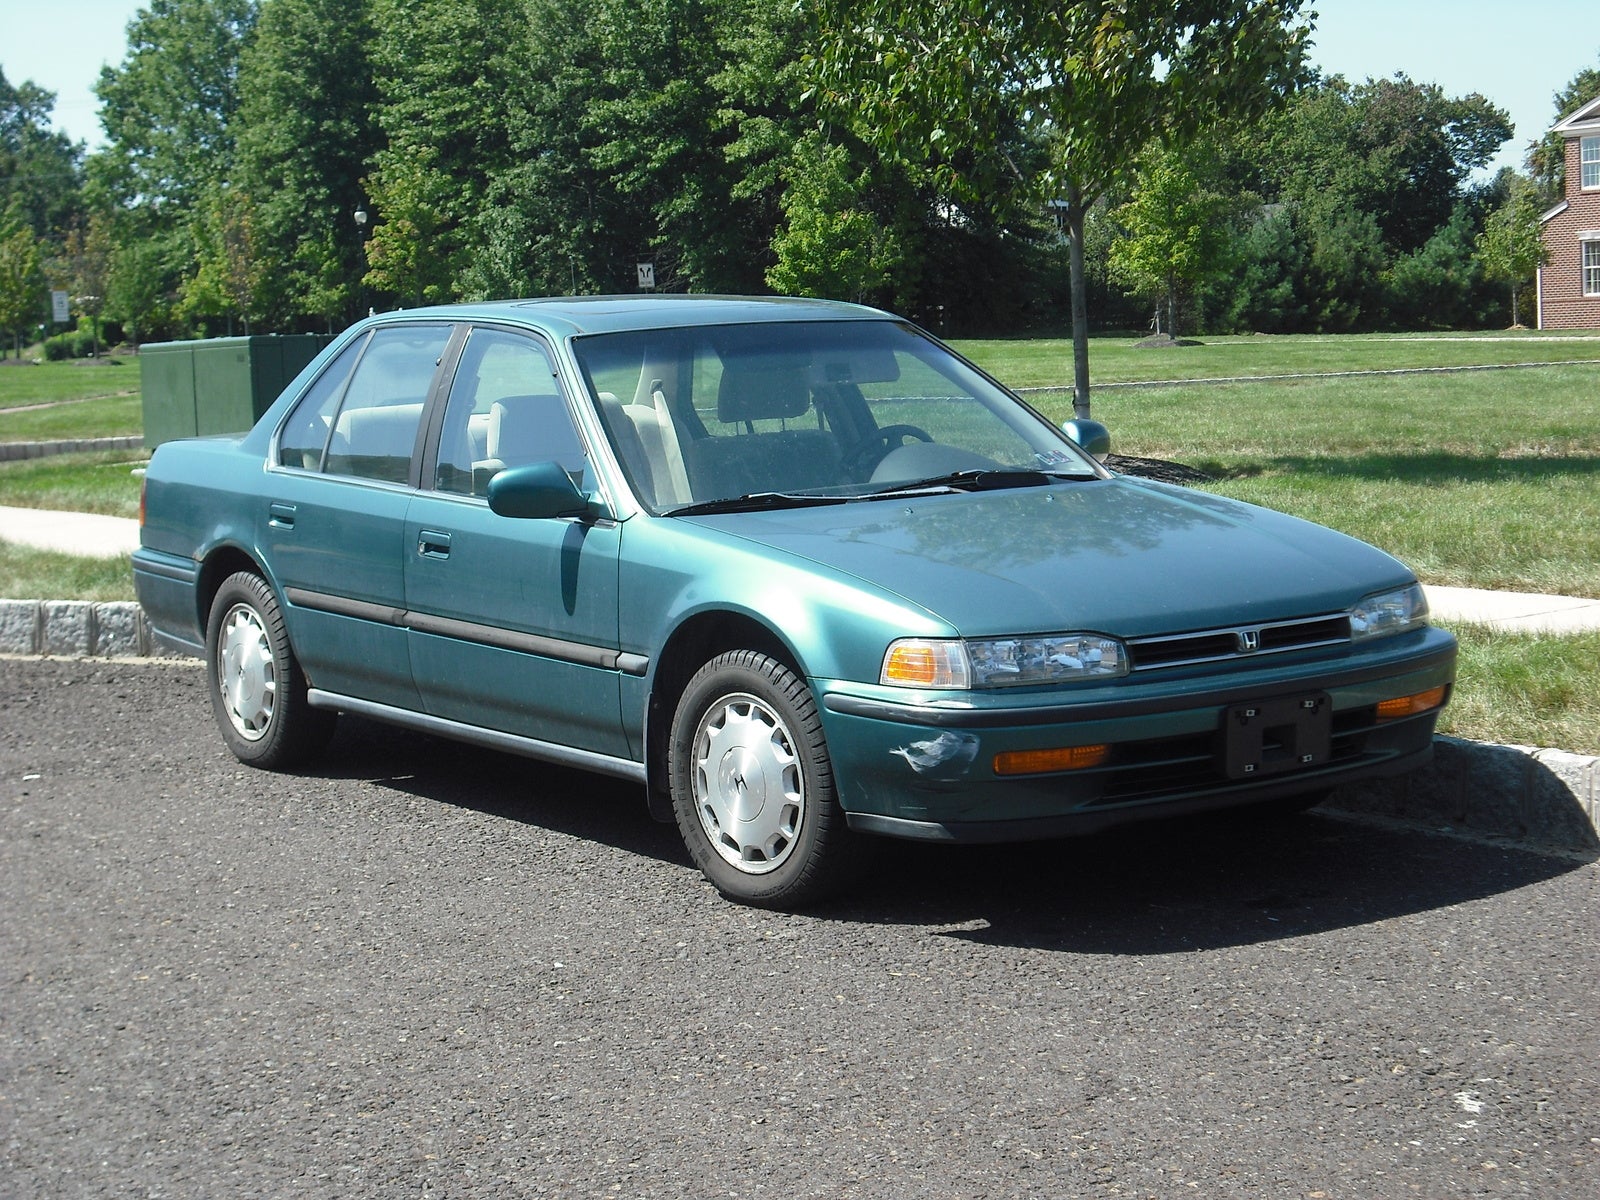 1993 Honda accord picture gallery